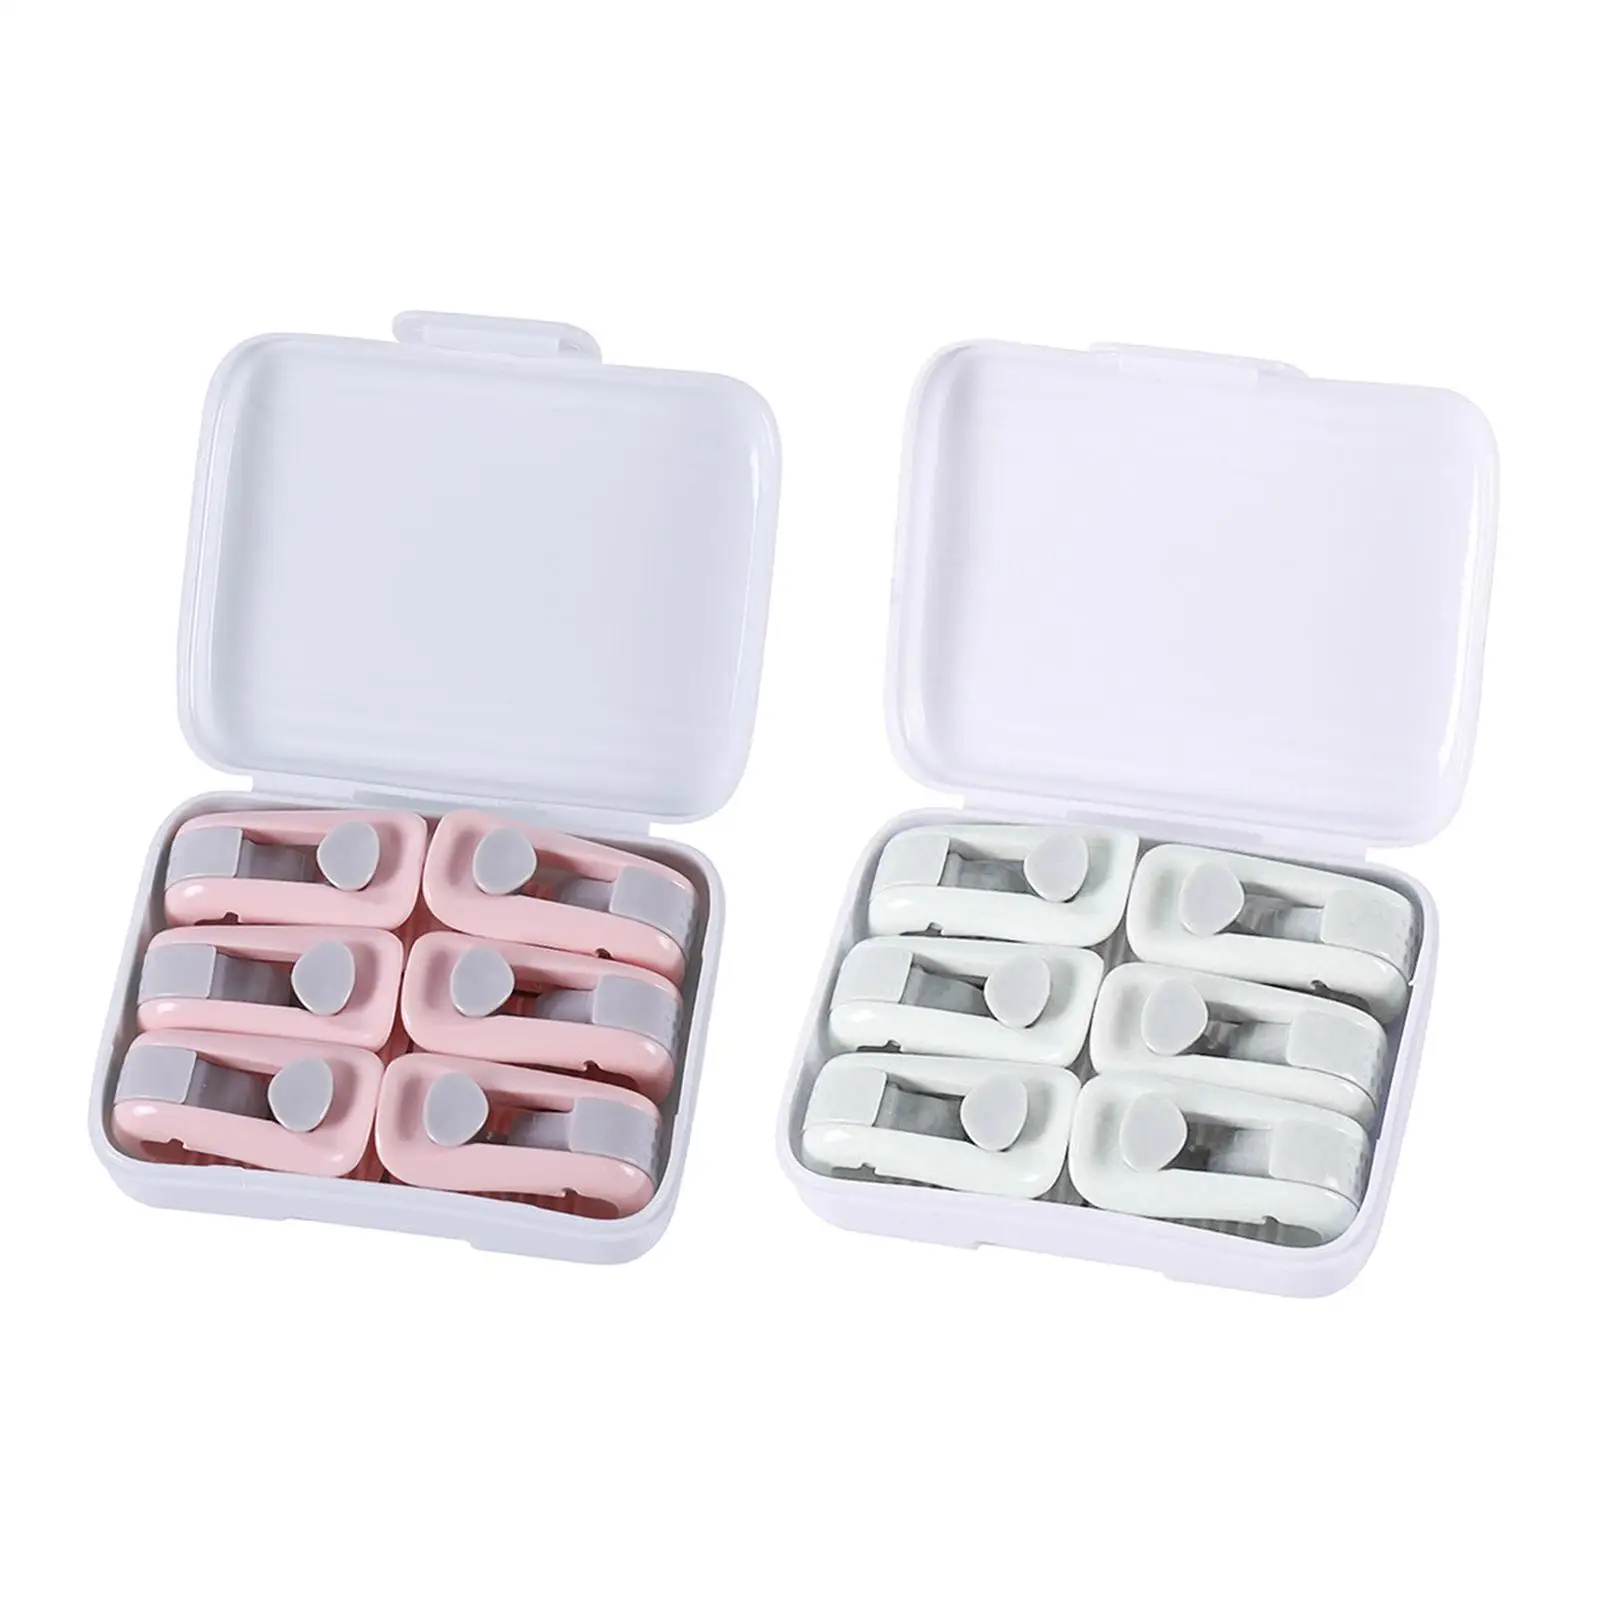 6 Pieces Multifunctional Bed Sheet Clips Reusable Fastener Reliable Needleless Adjustable Quilt Clamp for Comforter Towels Socks